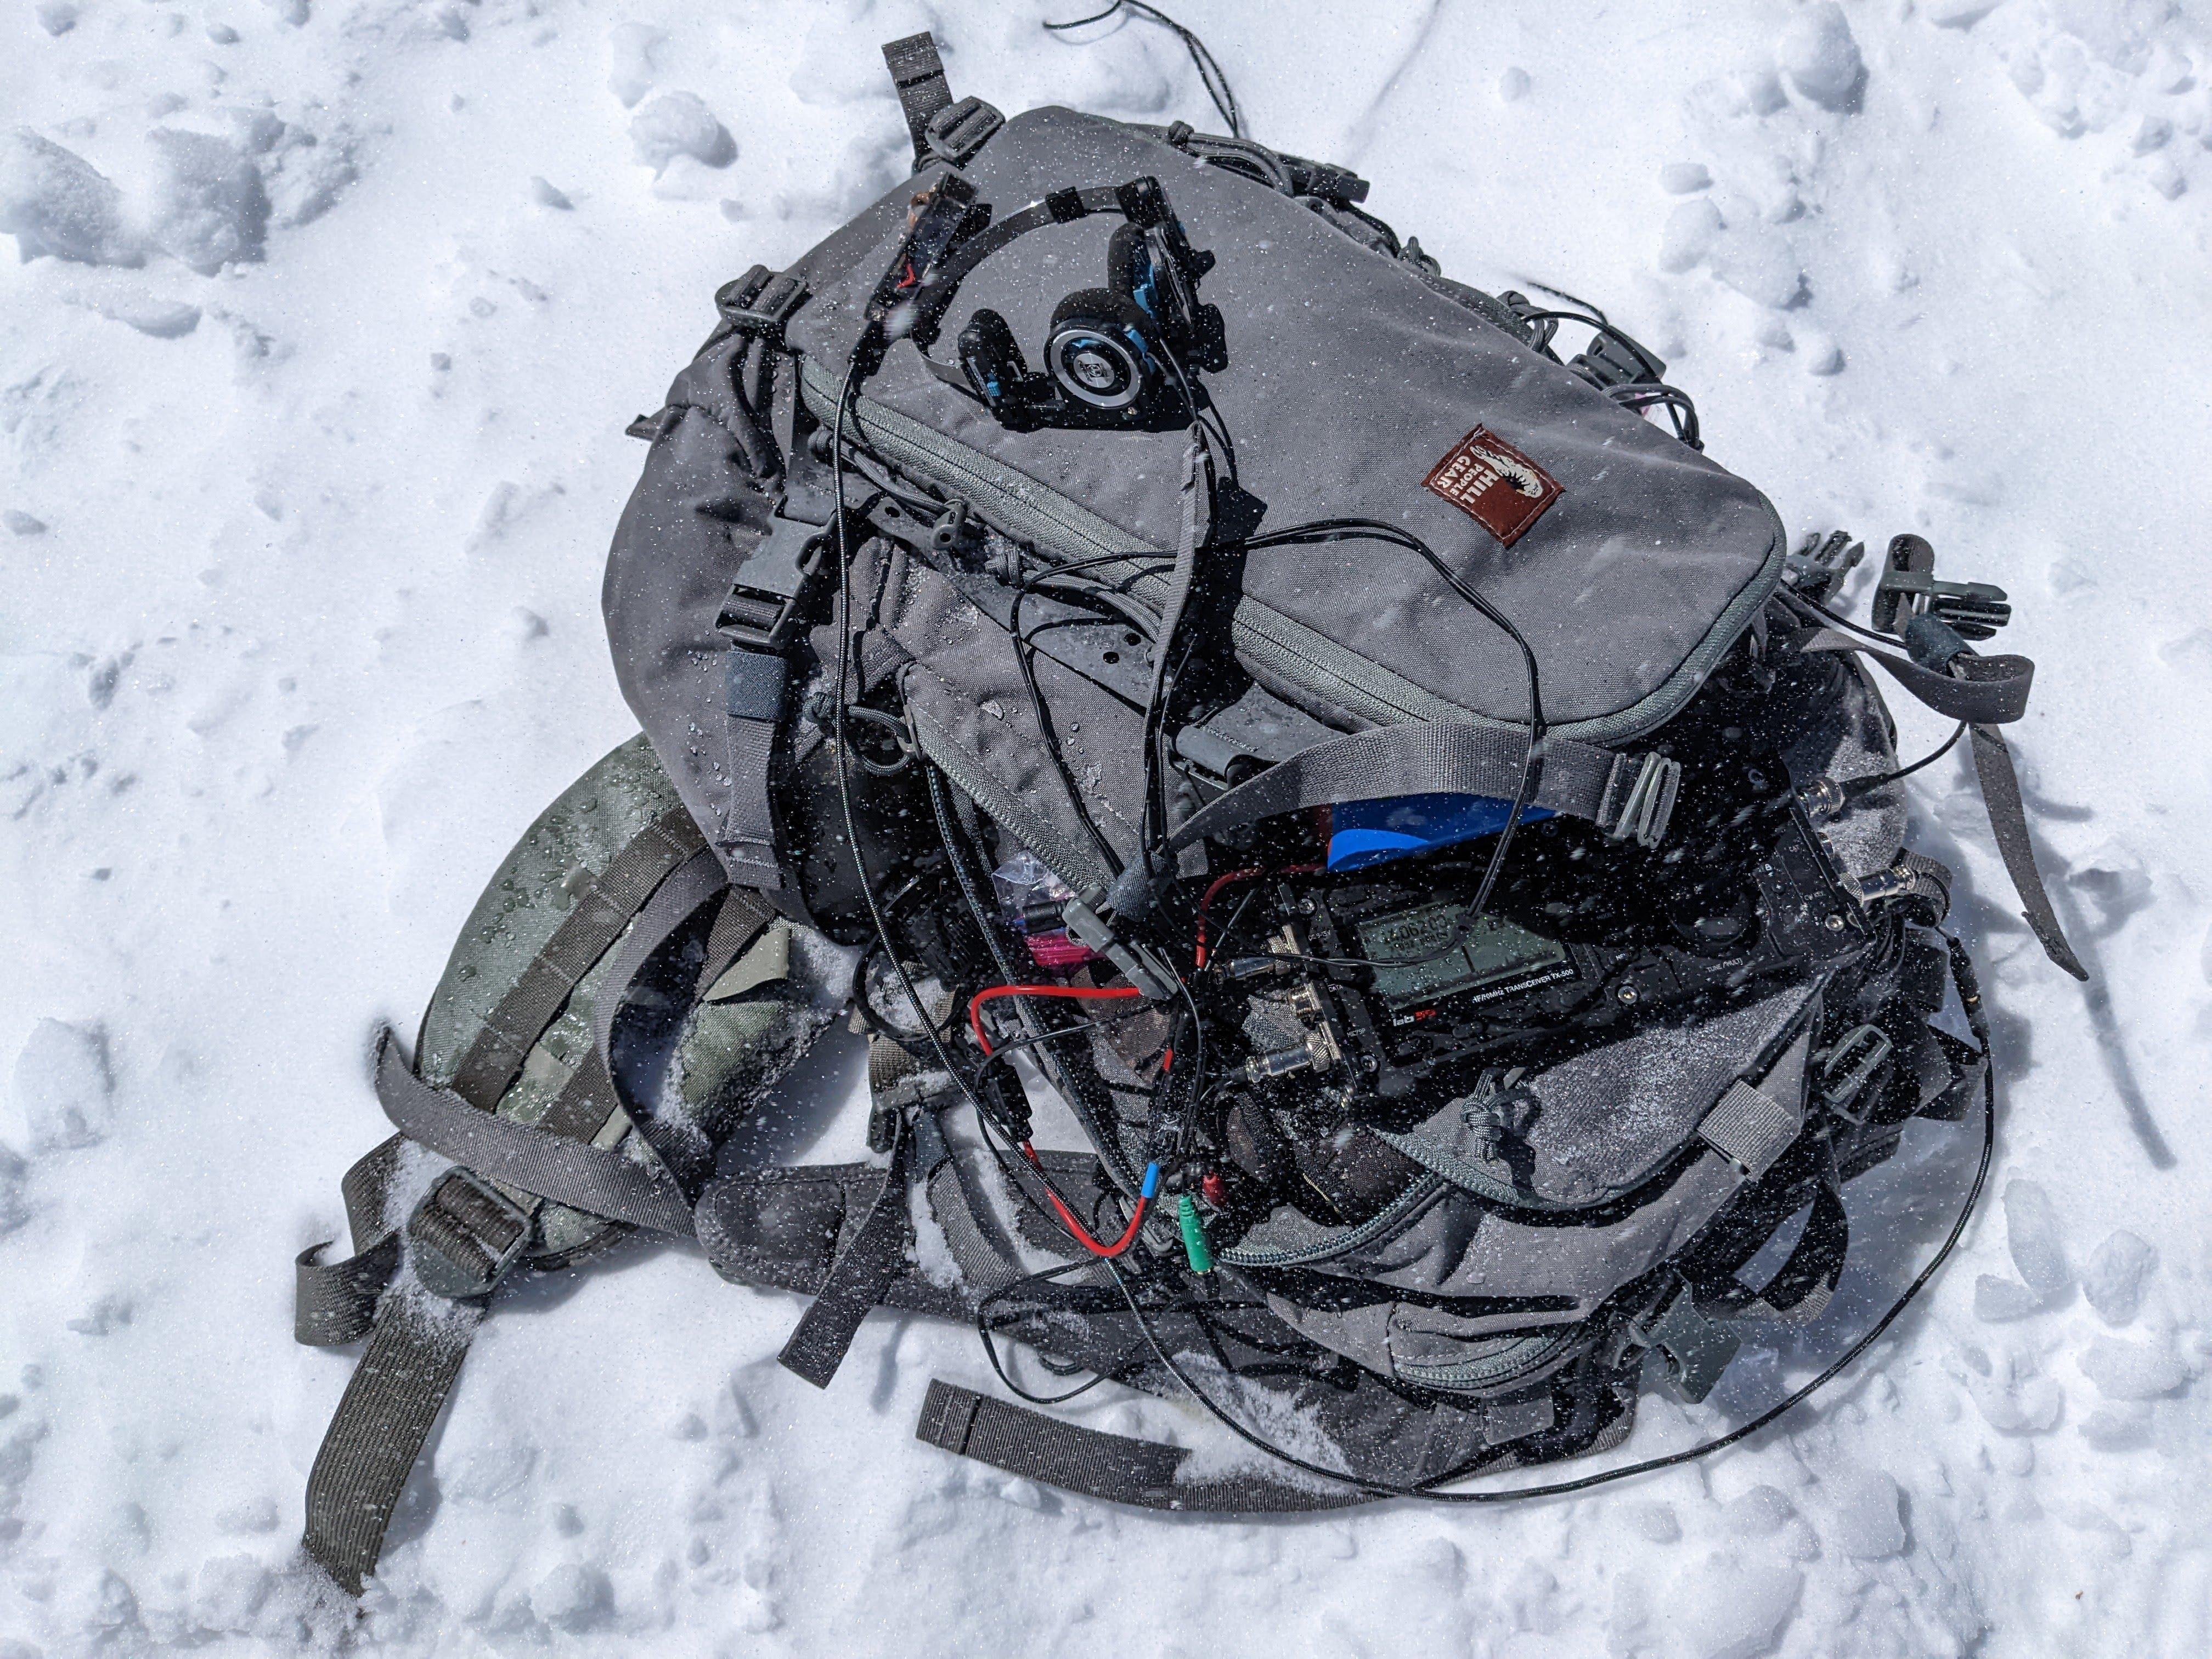 The portable shack, a splashproof rig is a must in the snow